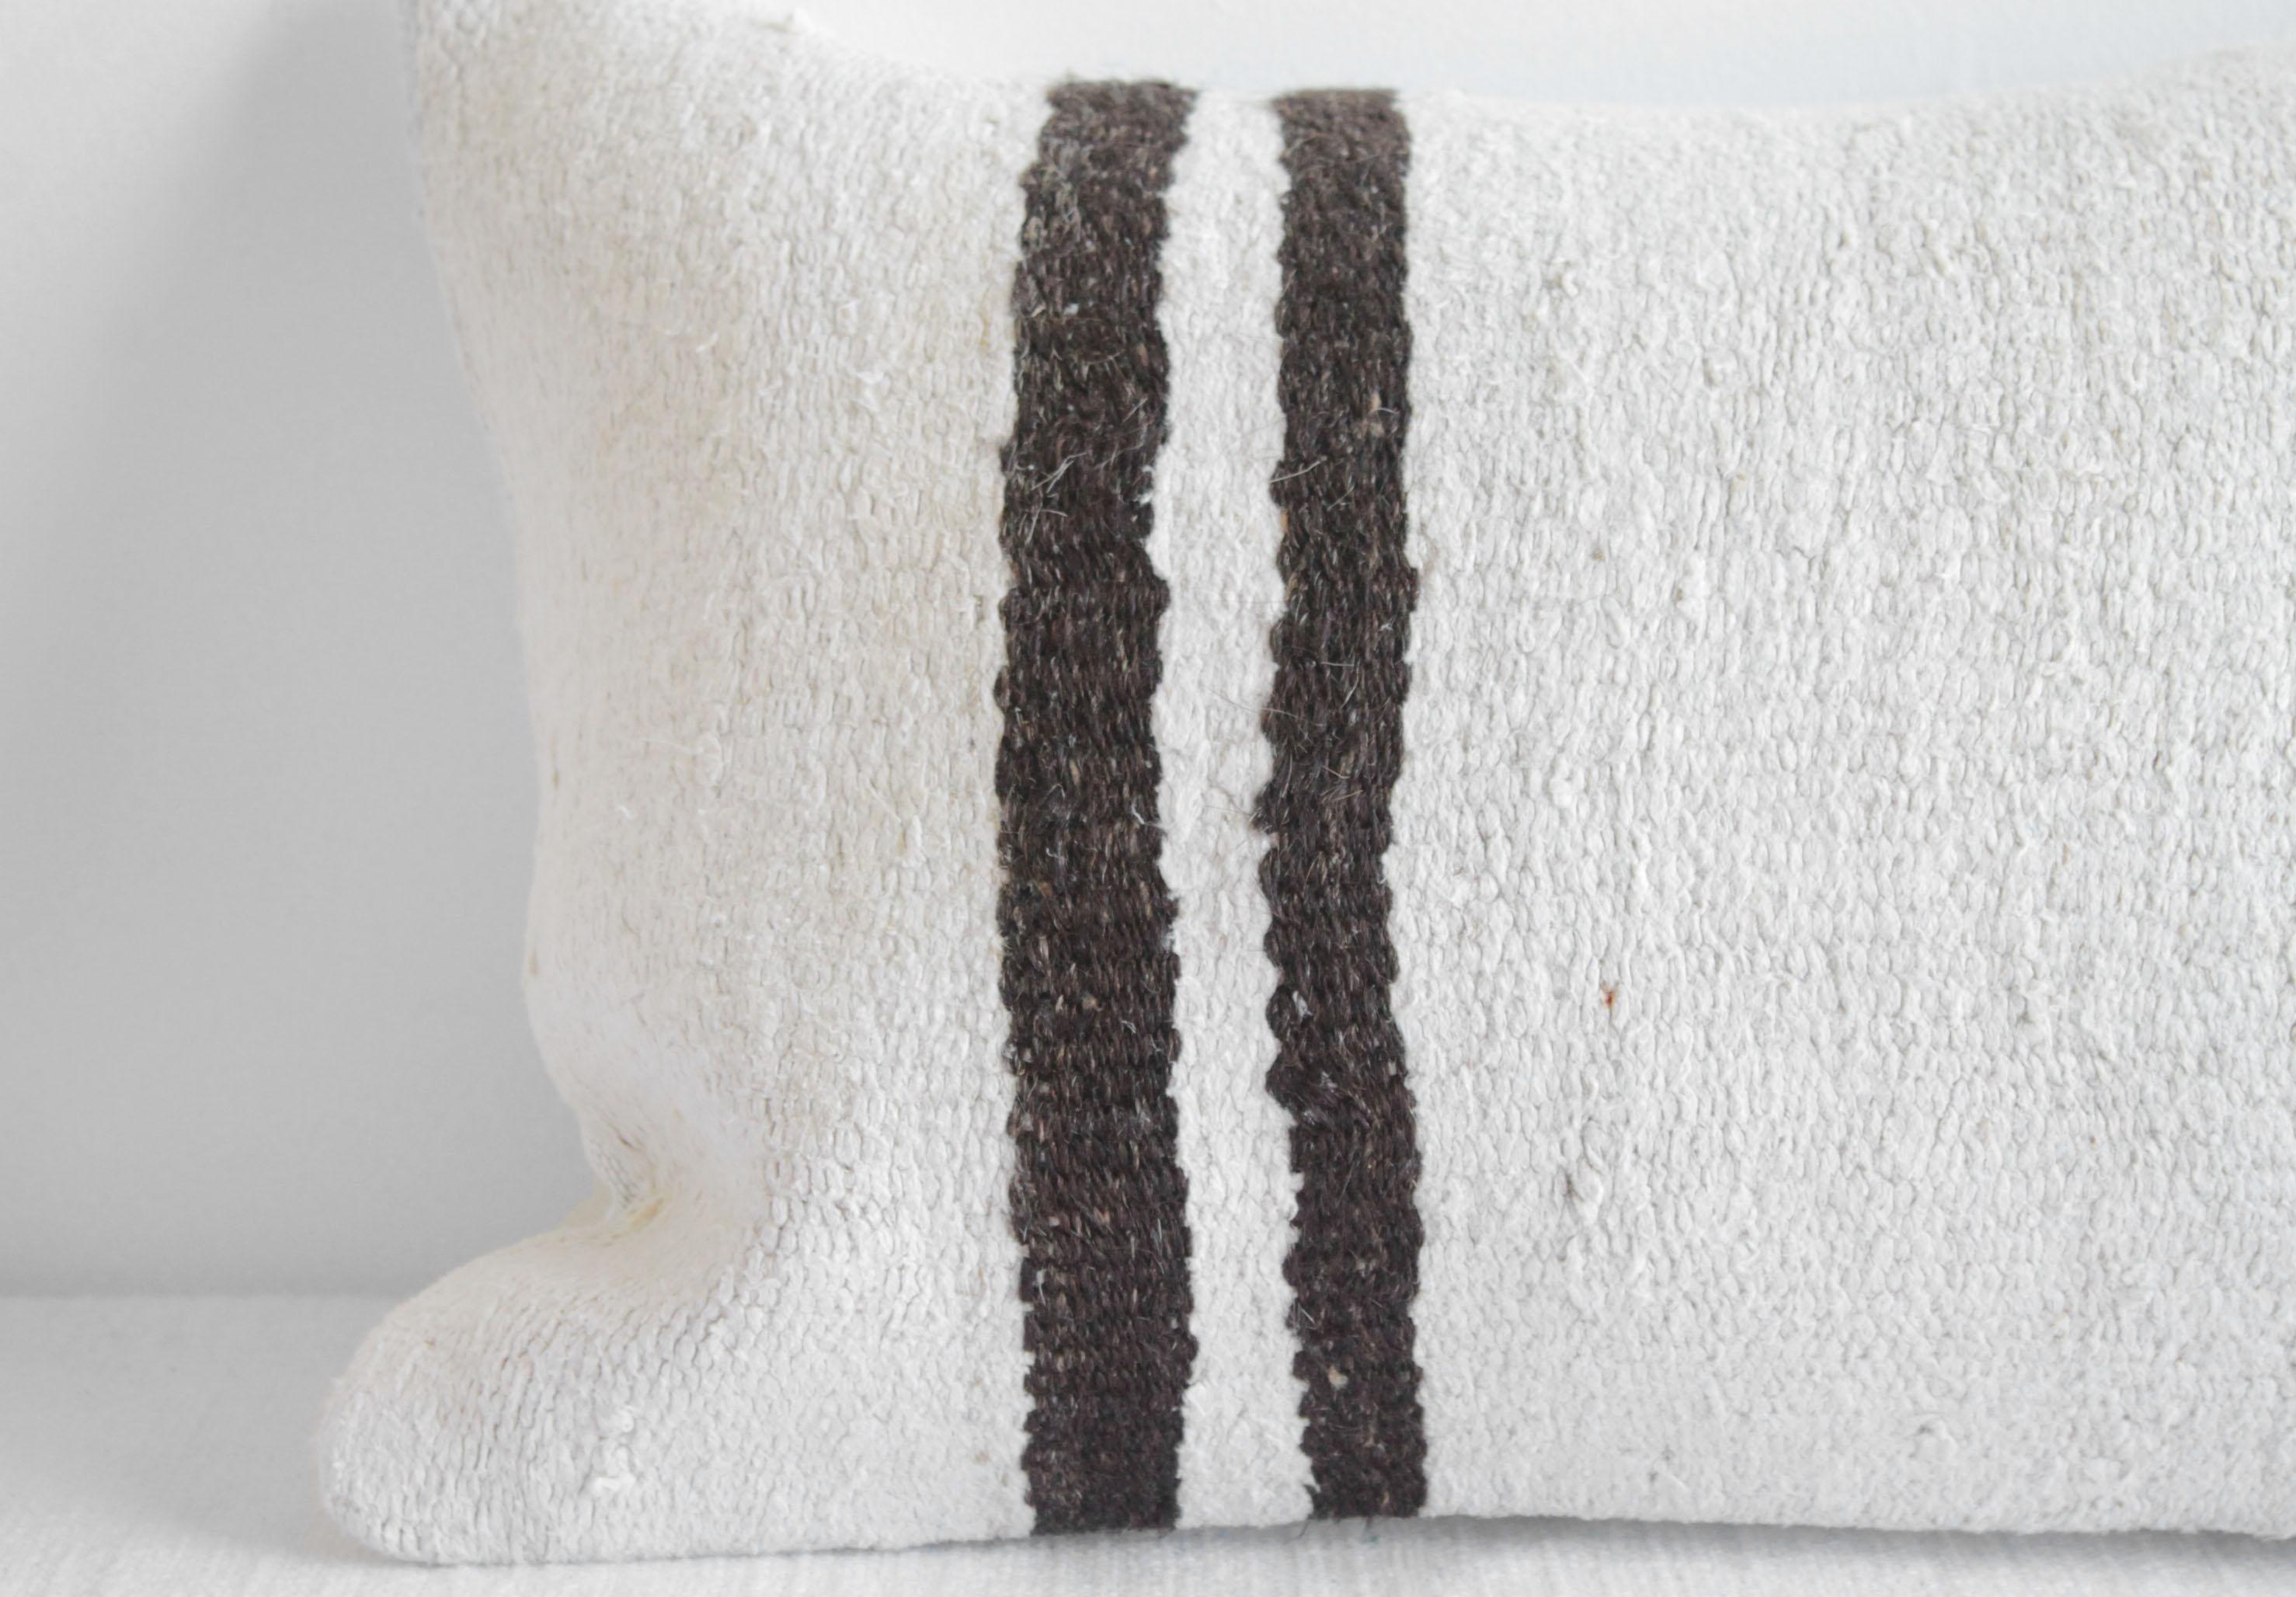 Unique pillow has been made with a turkish rug, in multiple white tones, and some variations of white and brown stripes woven through. The face is fully lined, with a coordinating backing in a solid fabric, and hidden zipper closure.
Spot cleaning